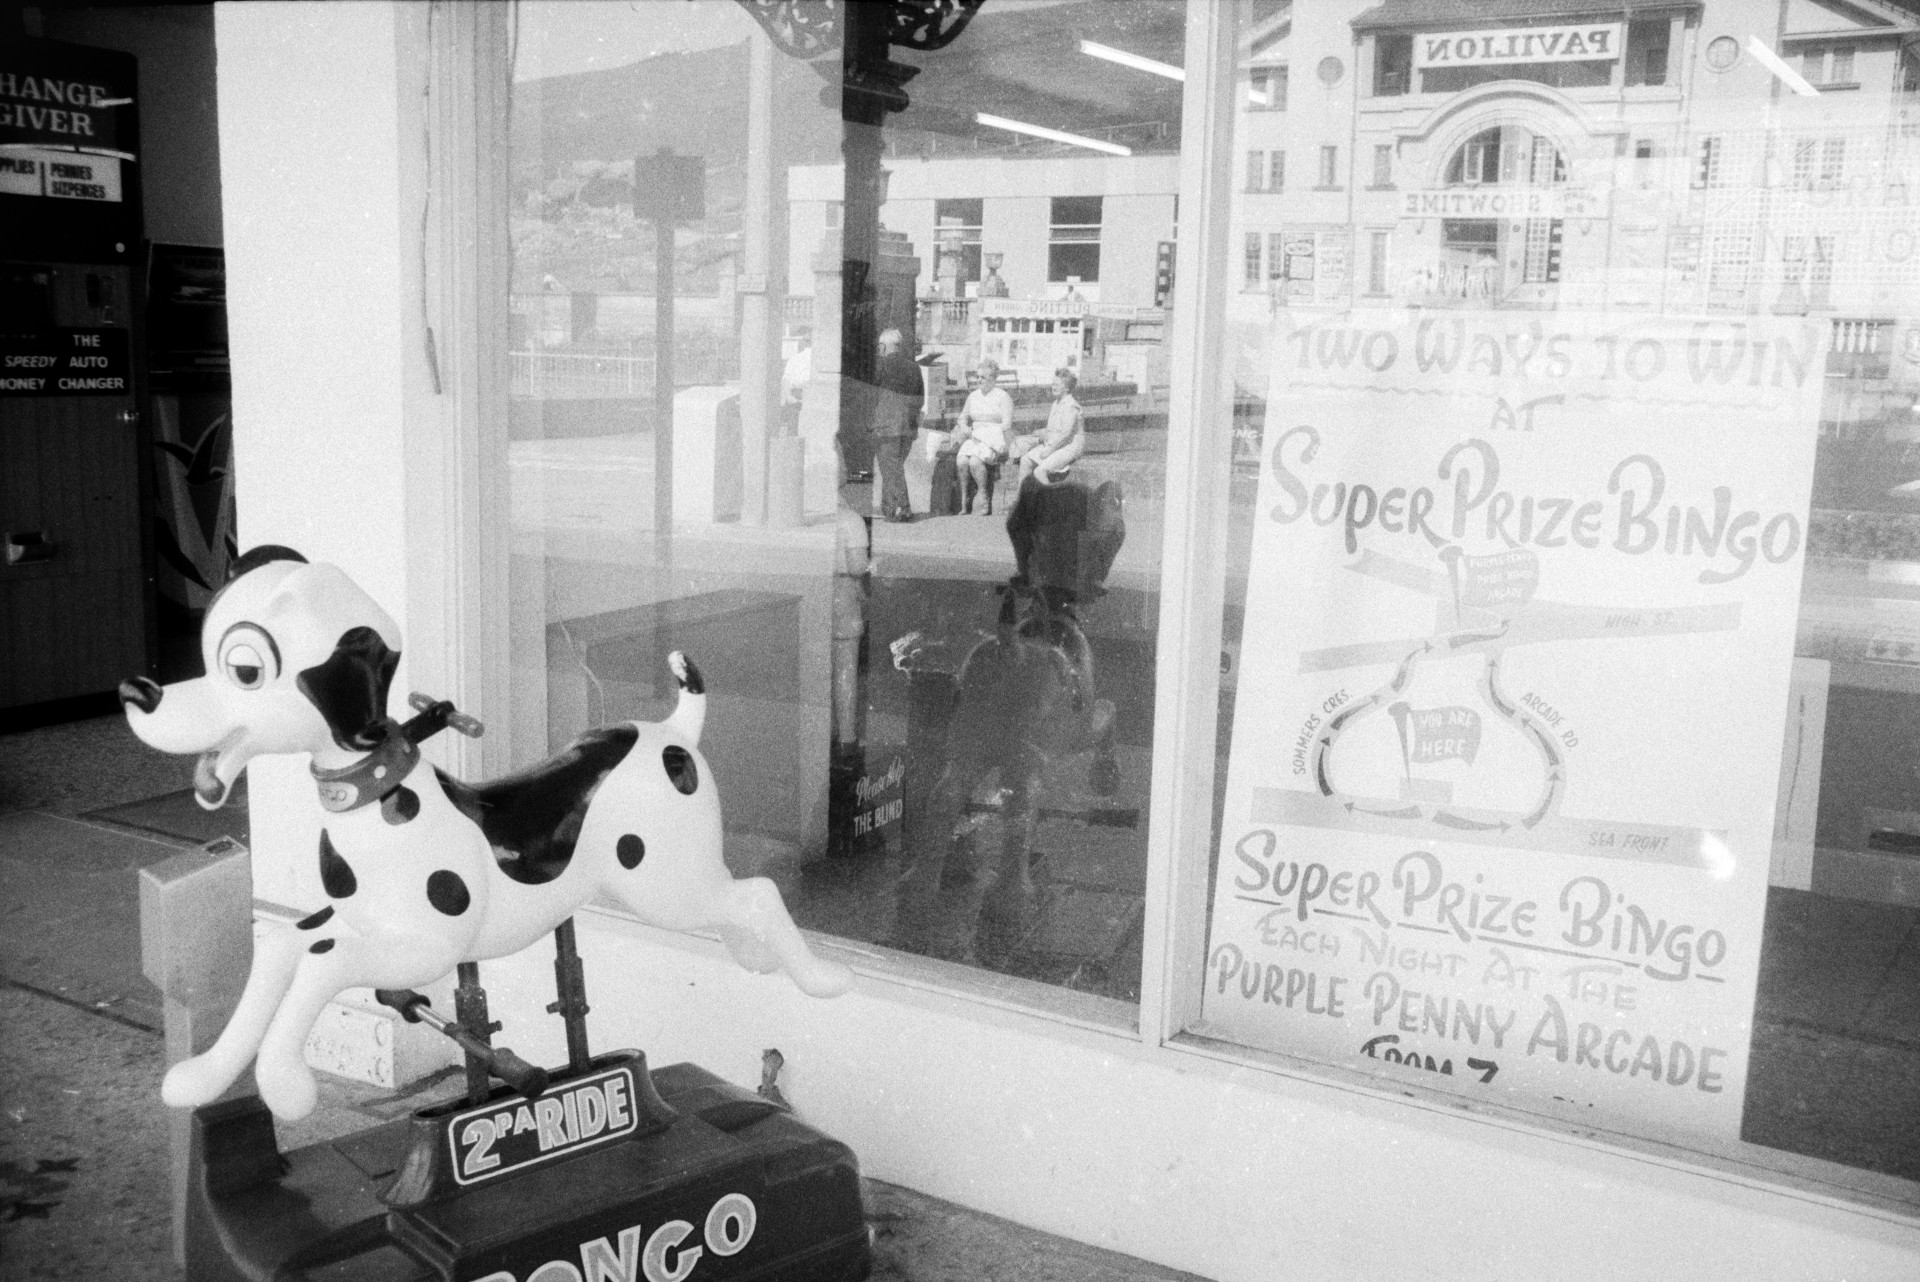 A children's coin operated ride in the shape of a Dalmatian outside a shop front at Ilfracombe. An advert for Bingo is in the shop window.